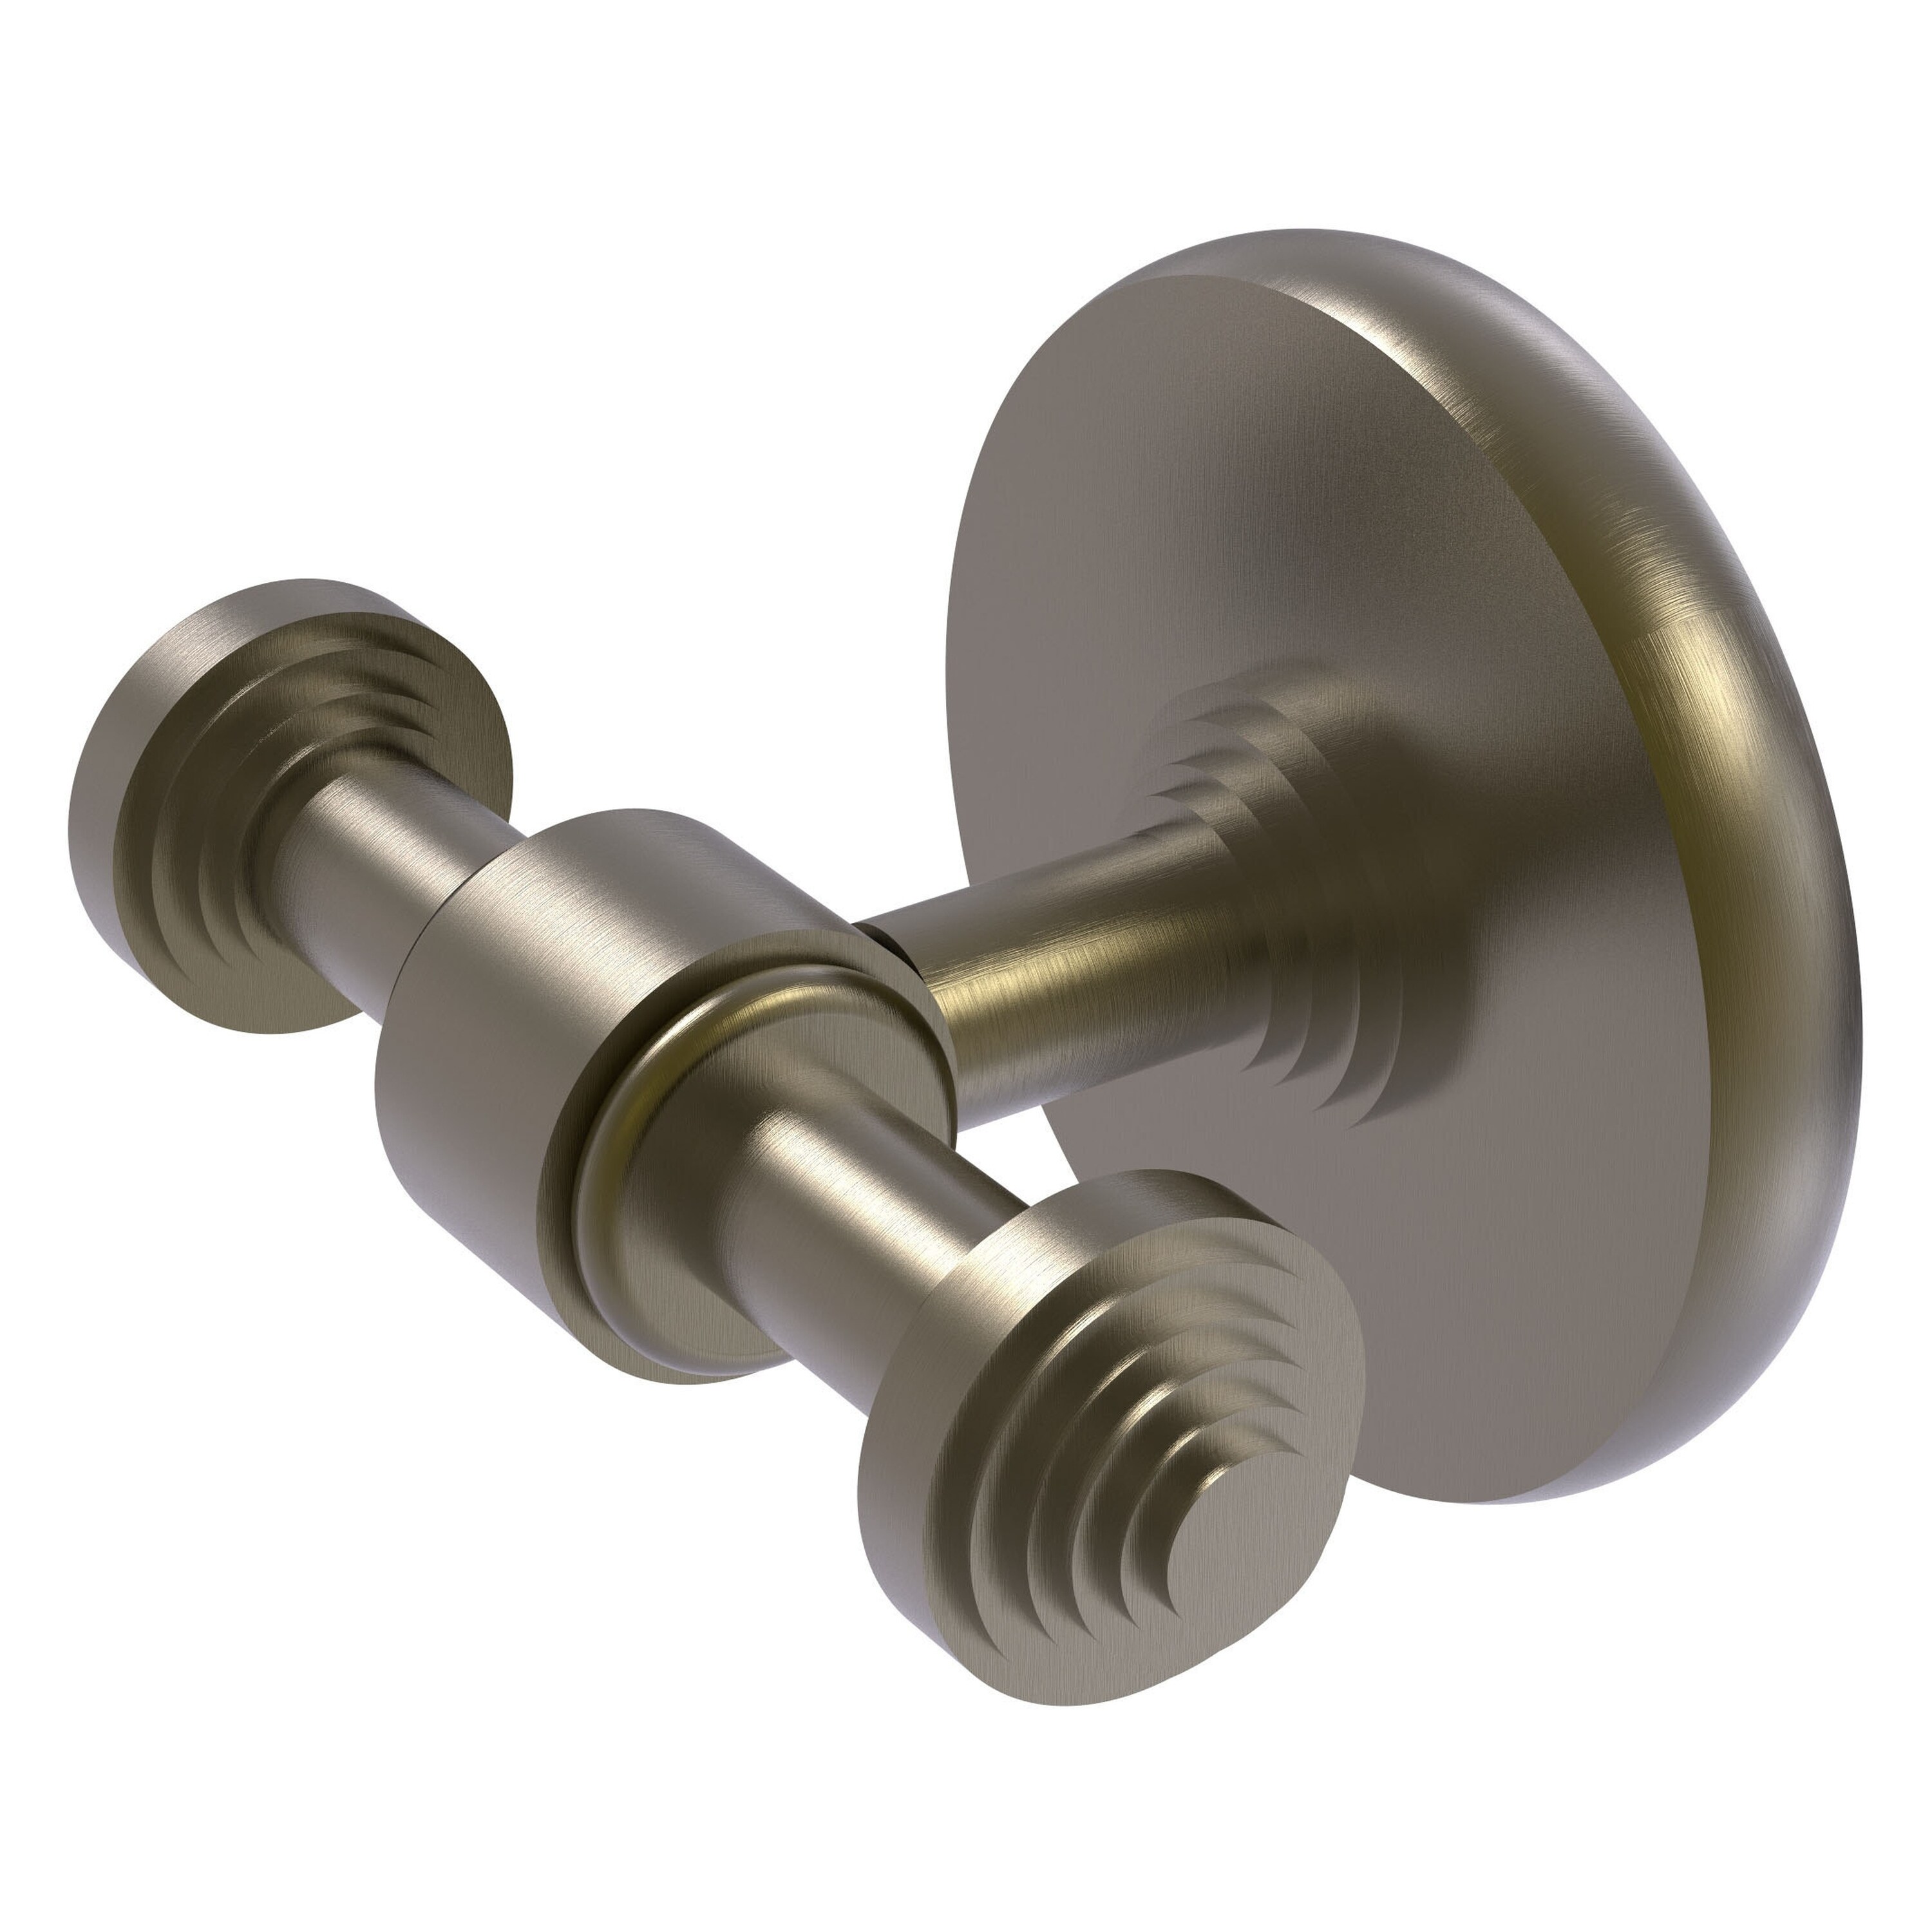 Allied Brass - Foxtrot Collection Robe Hook in Antique Brass